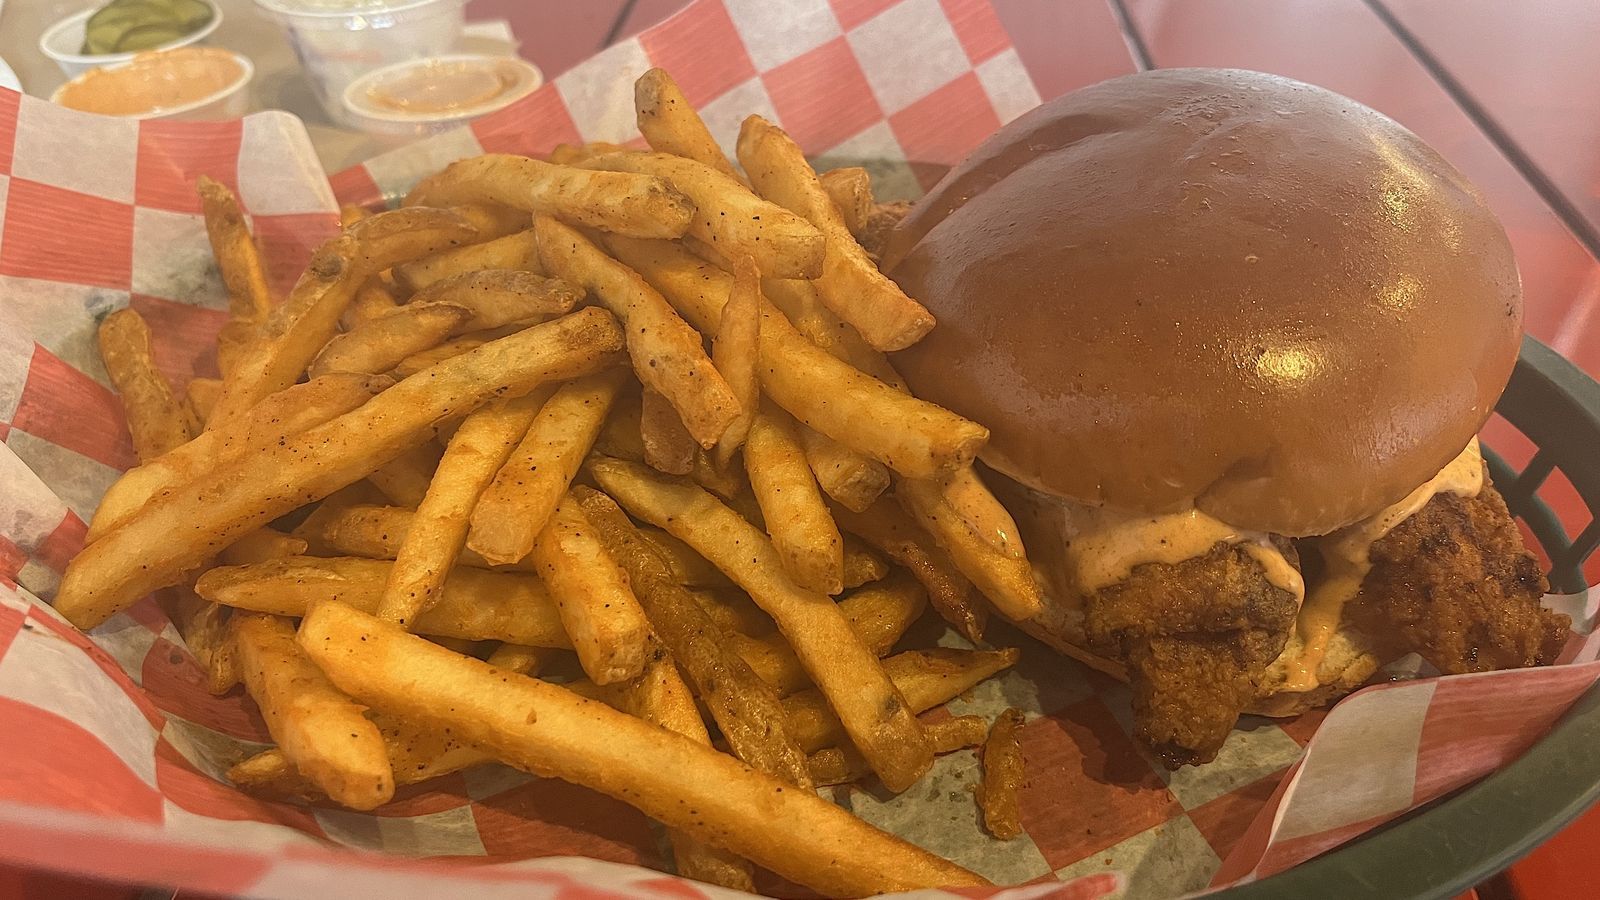 A chicken sandwich next to a bed of fries 